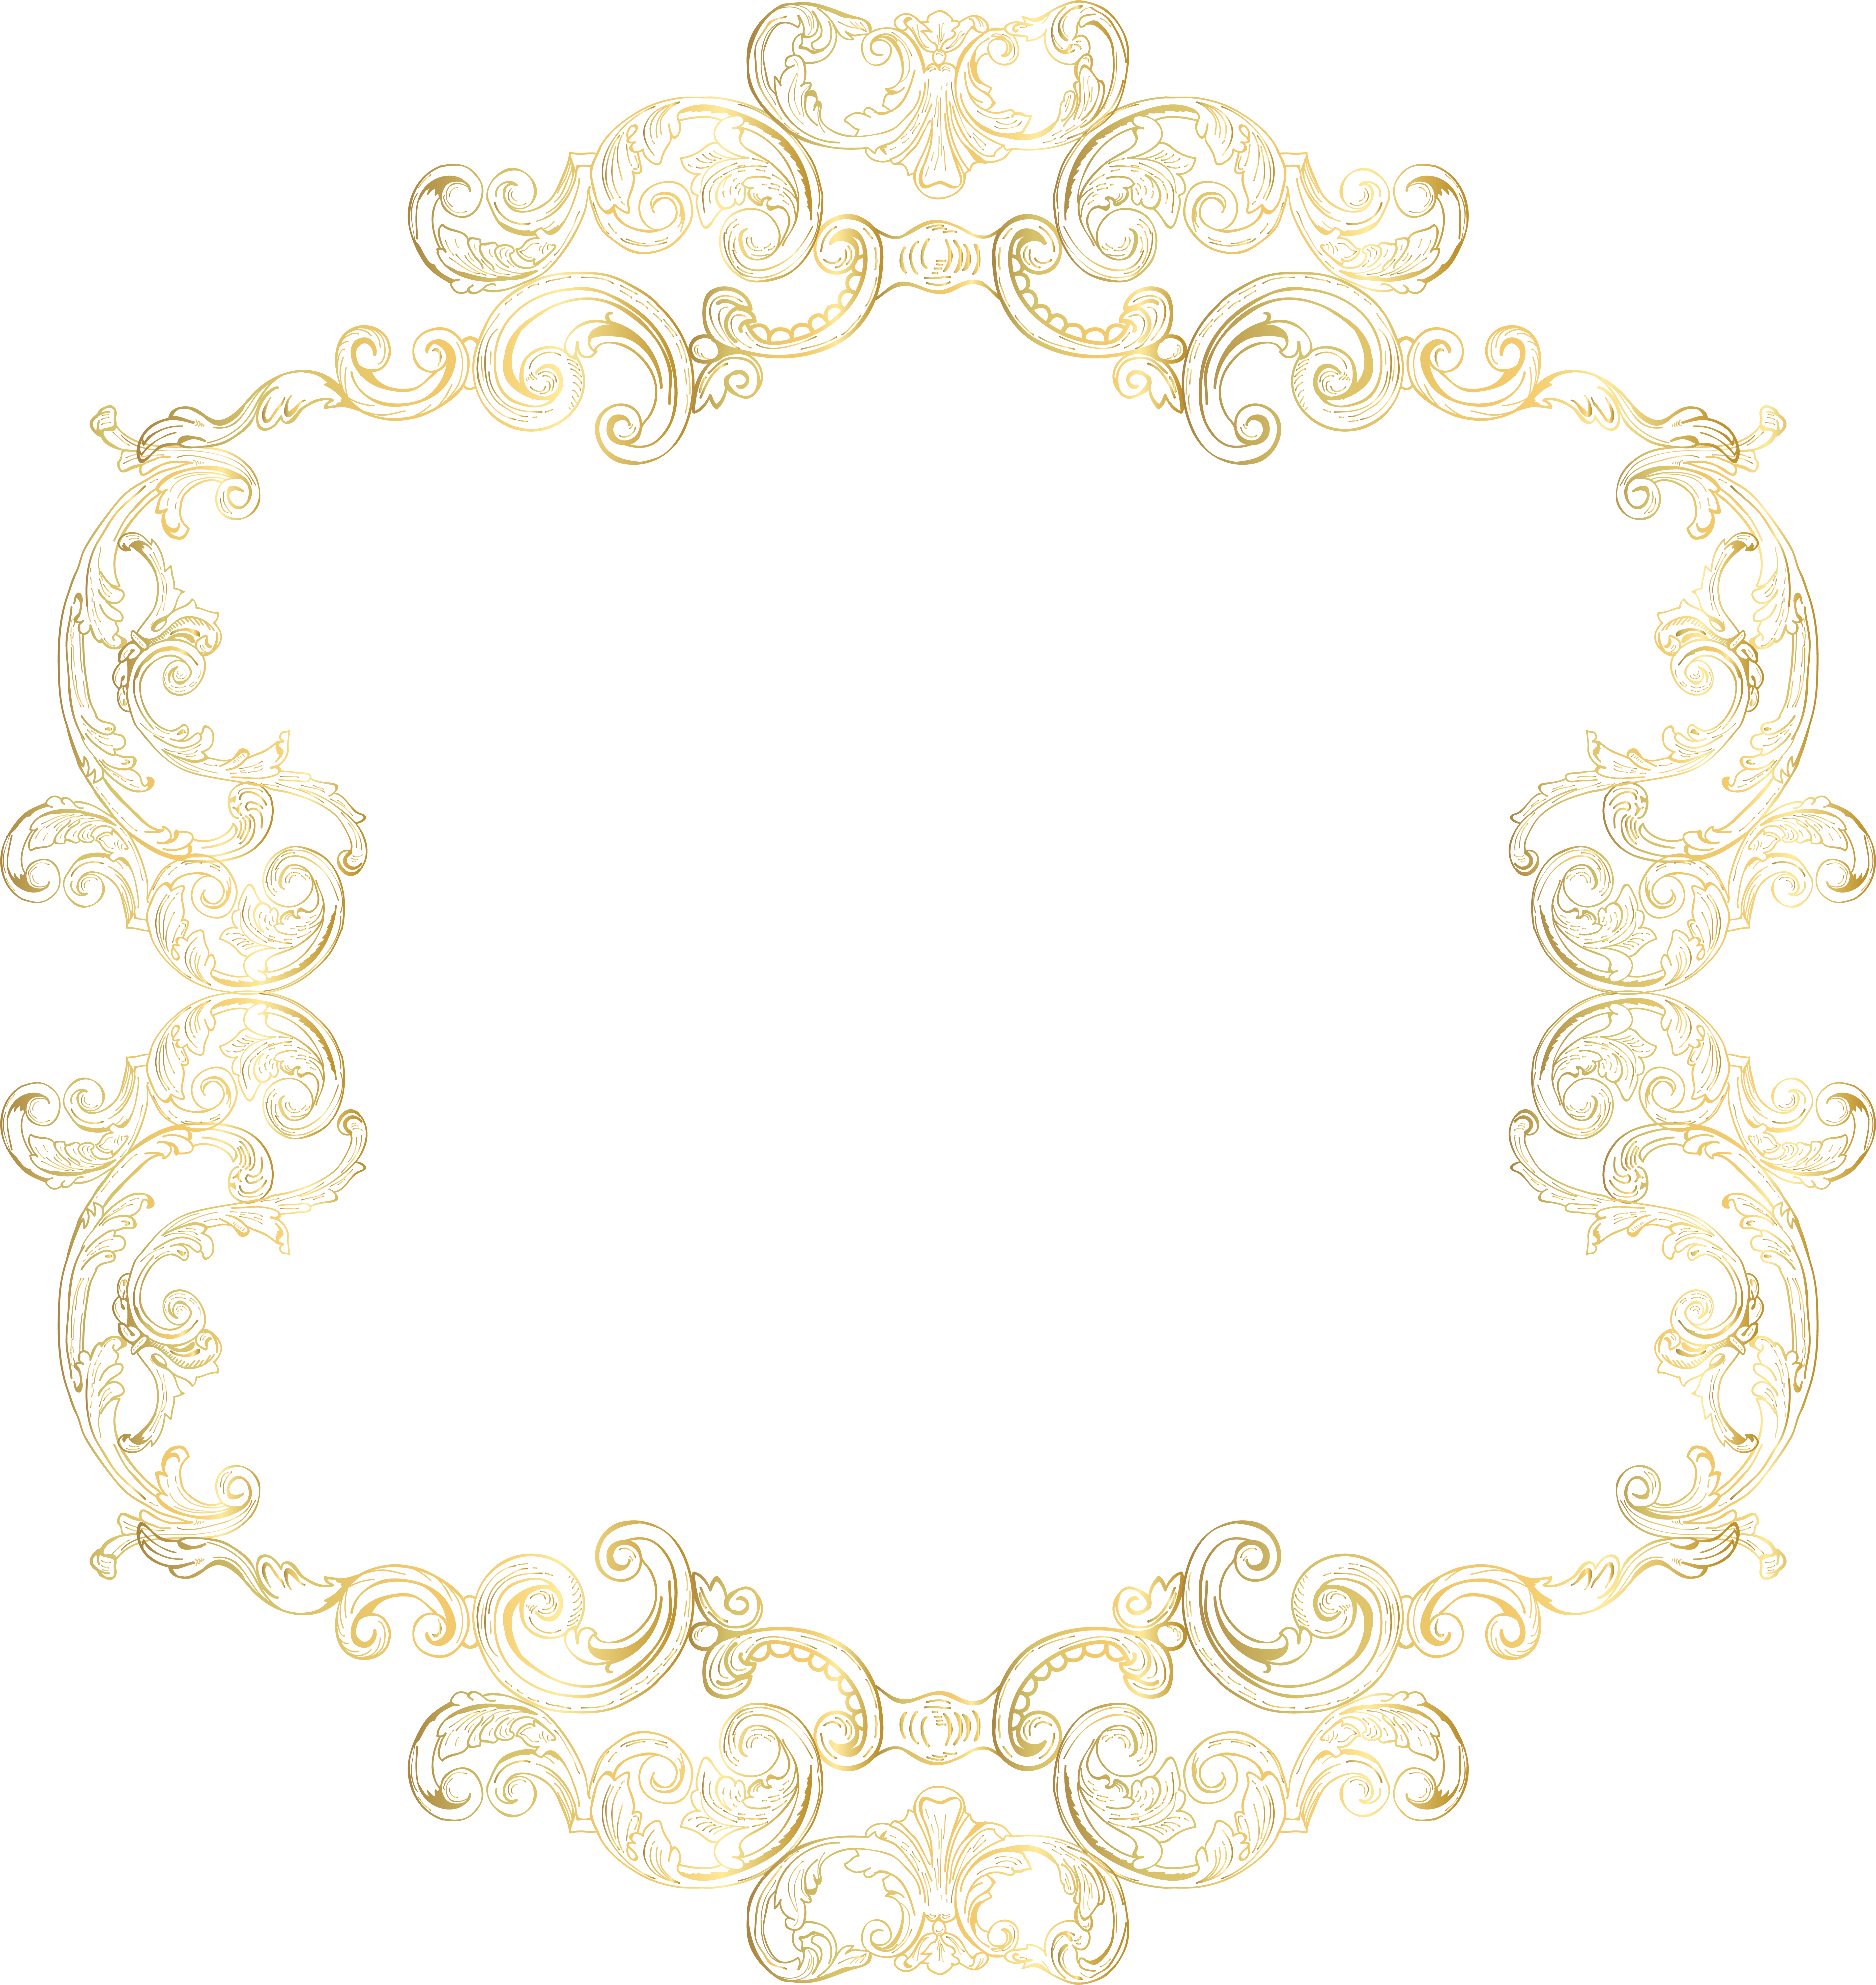 A Gold Ornate Frame With Black Background